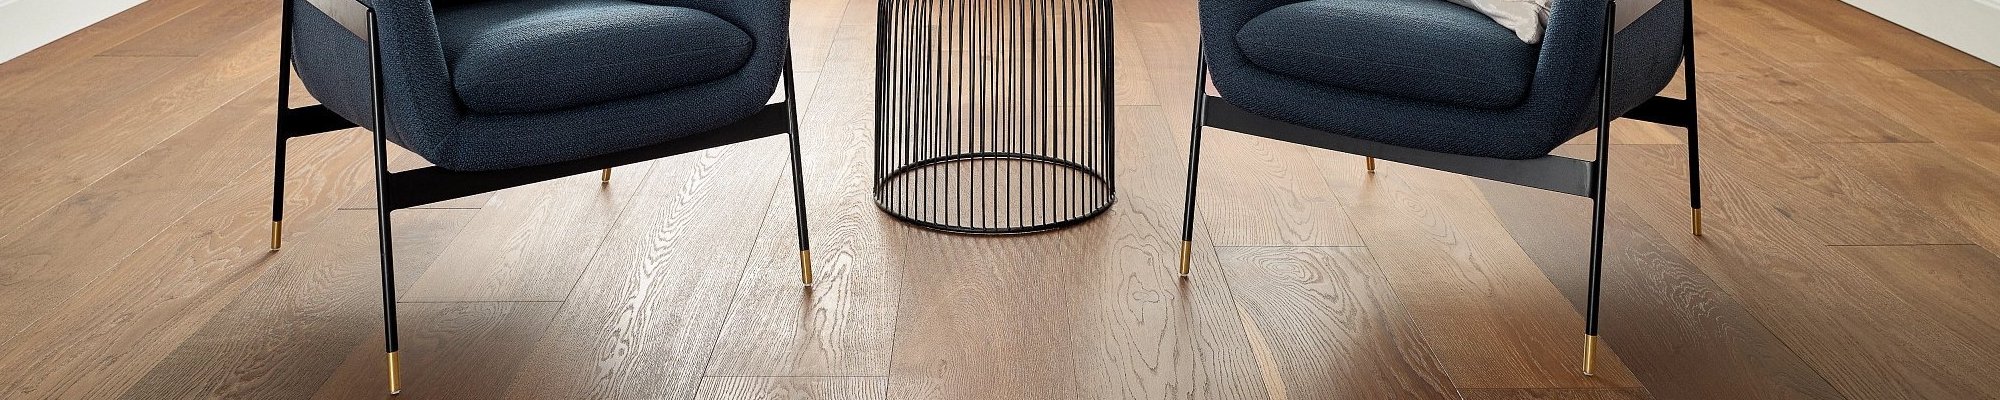 two chairs in a room with a hardwood floor from Five Star Flooring in Gothenburg